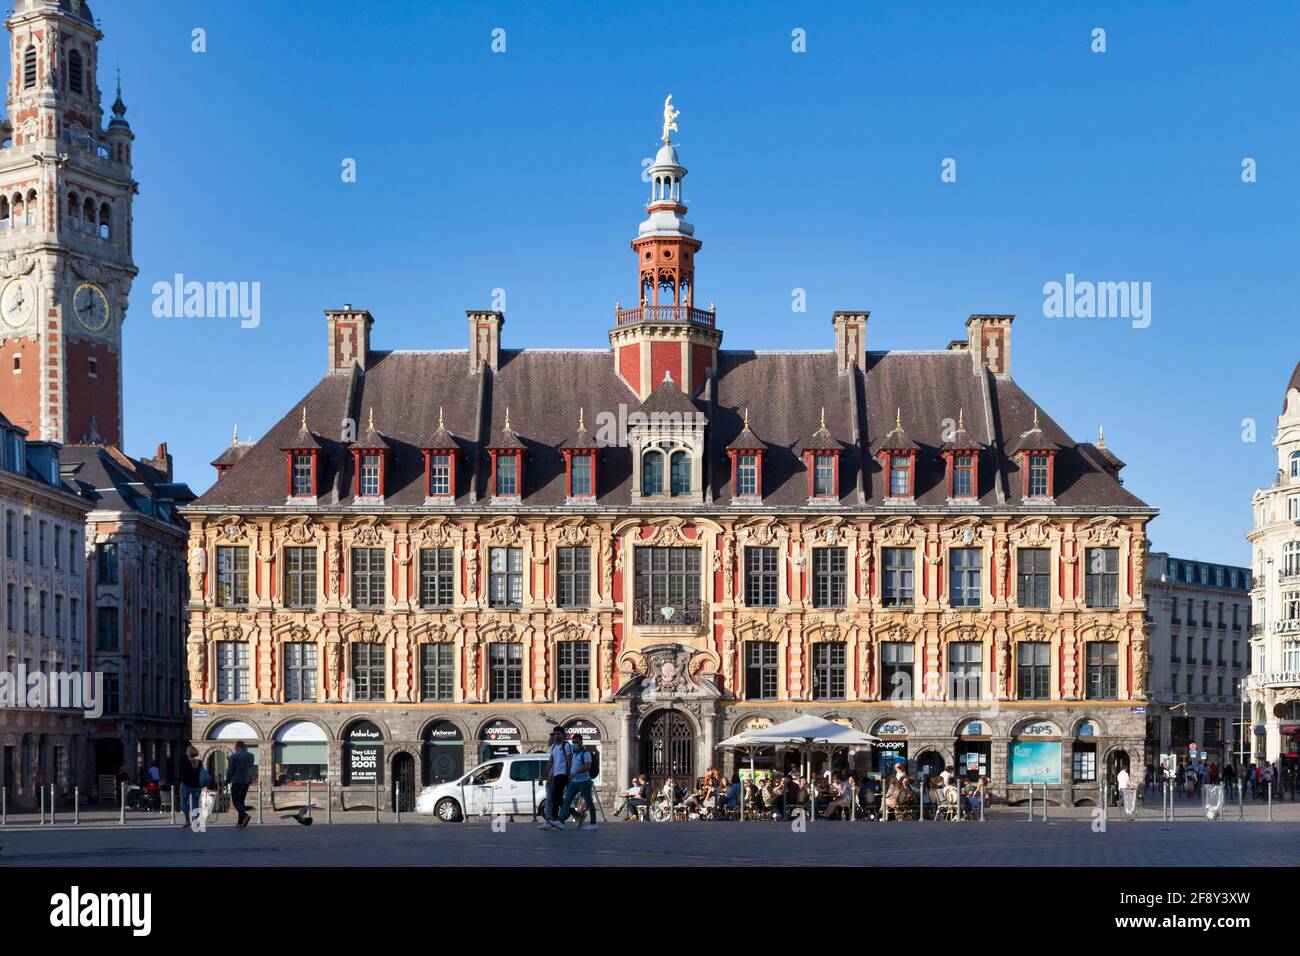 Lille, France - June 22 2020: The Vieille Bourse (Old Stock Exchange) is the former building of the Lille Chamber of Commerce and Industry. Stock Photo